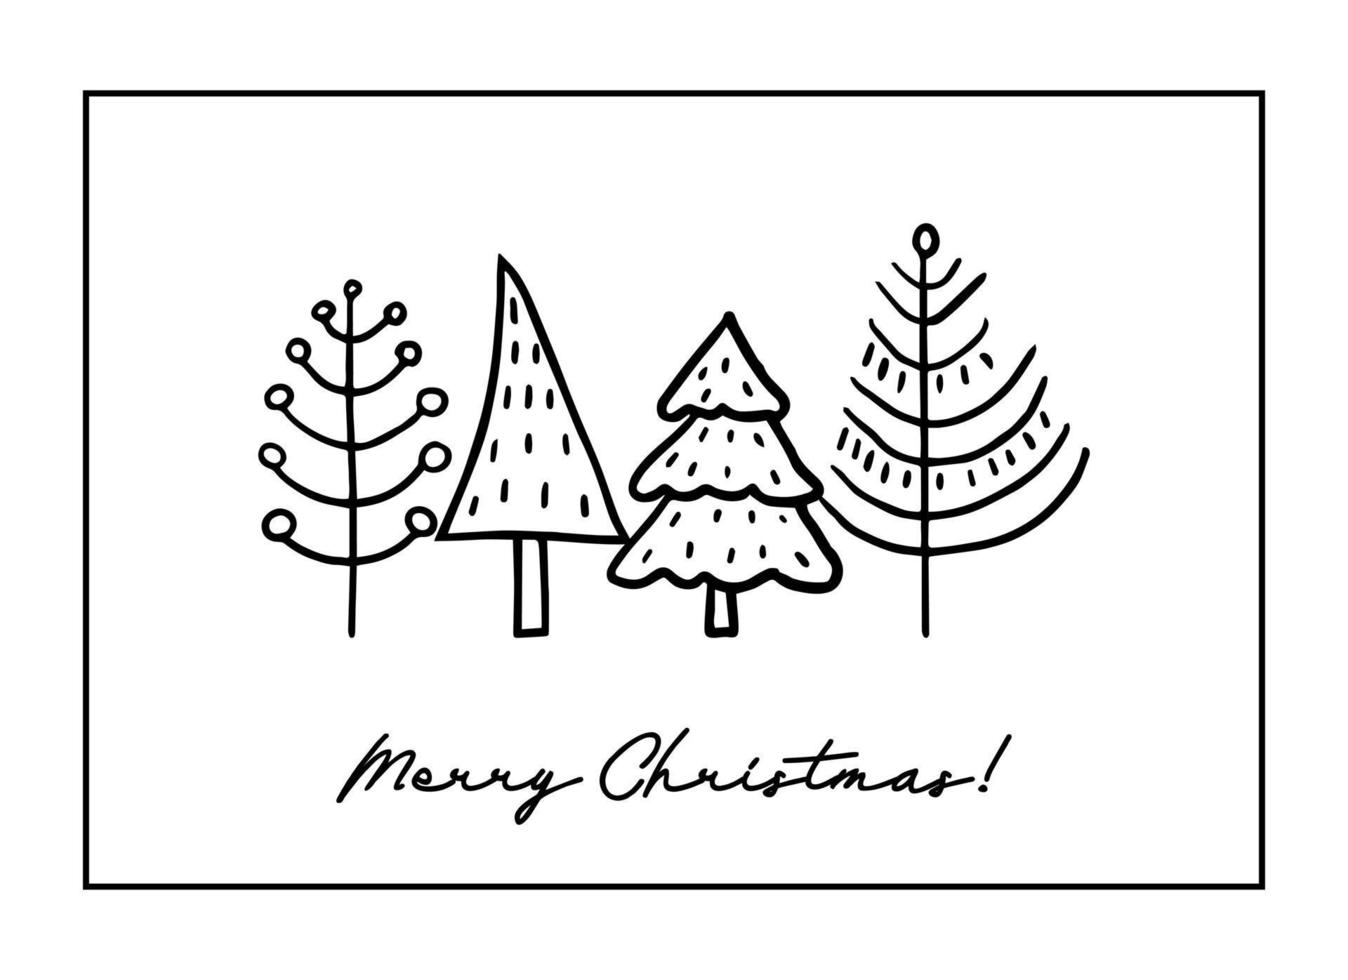 Christmas greeting cards made of hand drawn stylized Christmas trees. Scandinavian style doodle elements vector